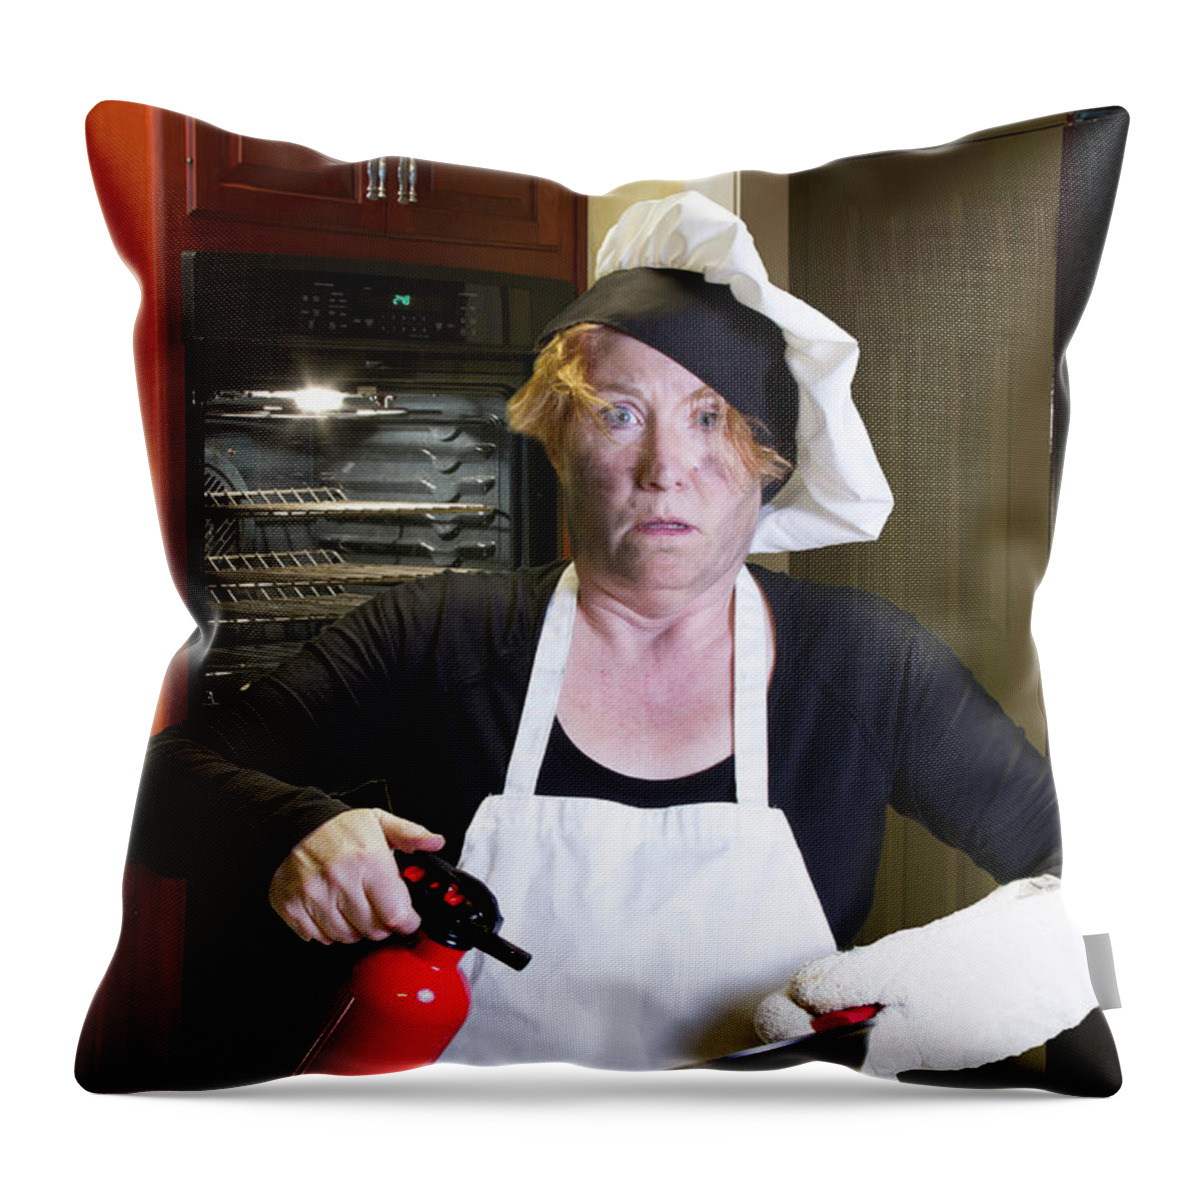 Burning Throw Pillow featuring the photograph Kichen disaster in apron with fire extinguisher and pan by Karen Foley